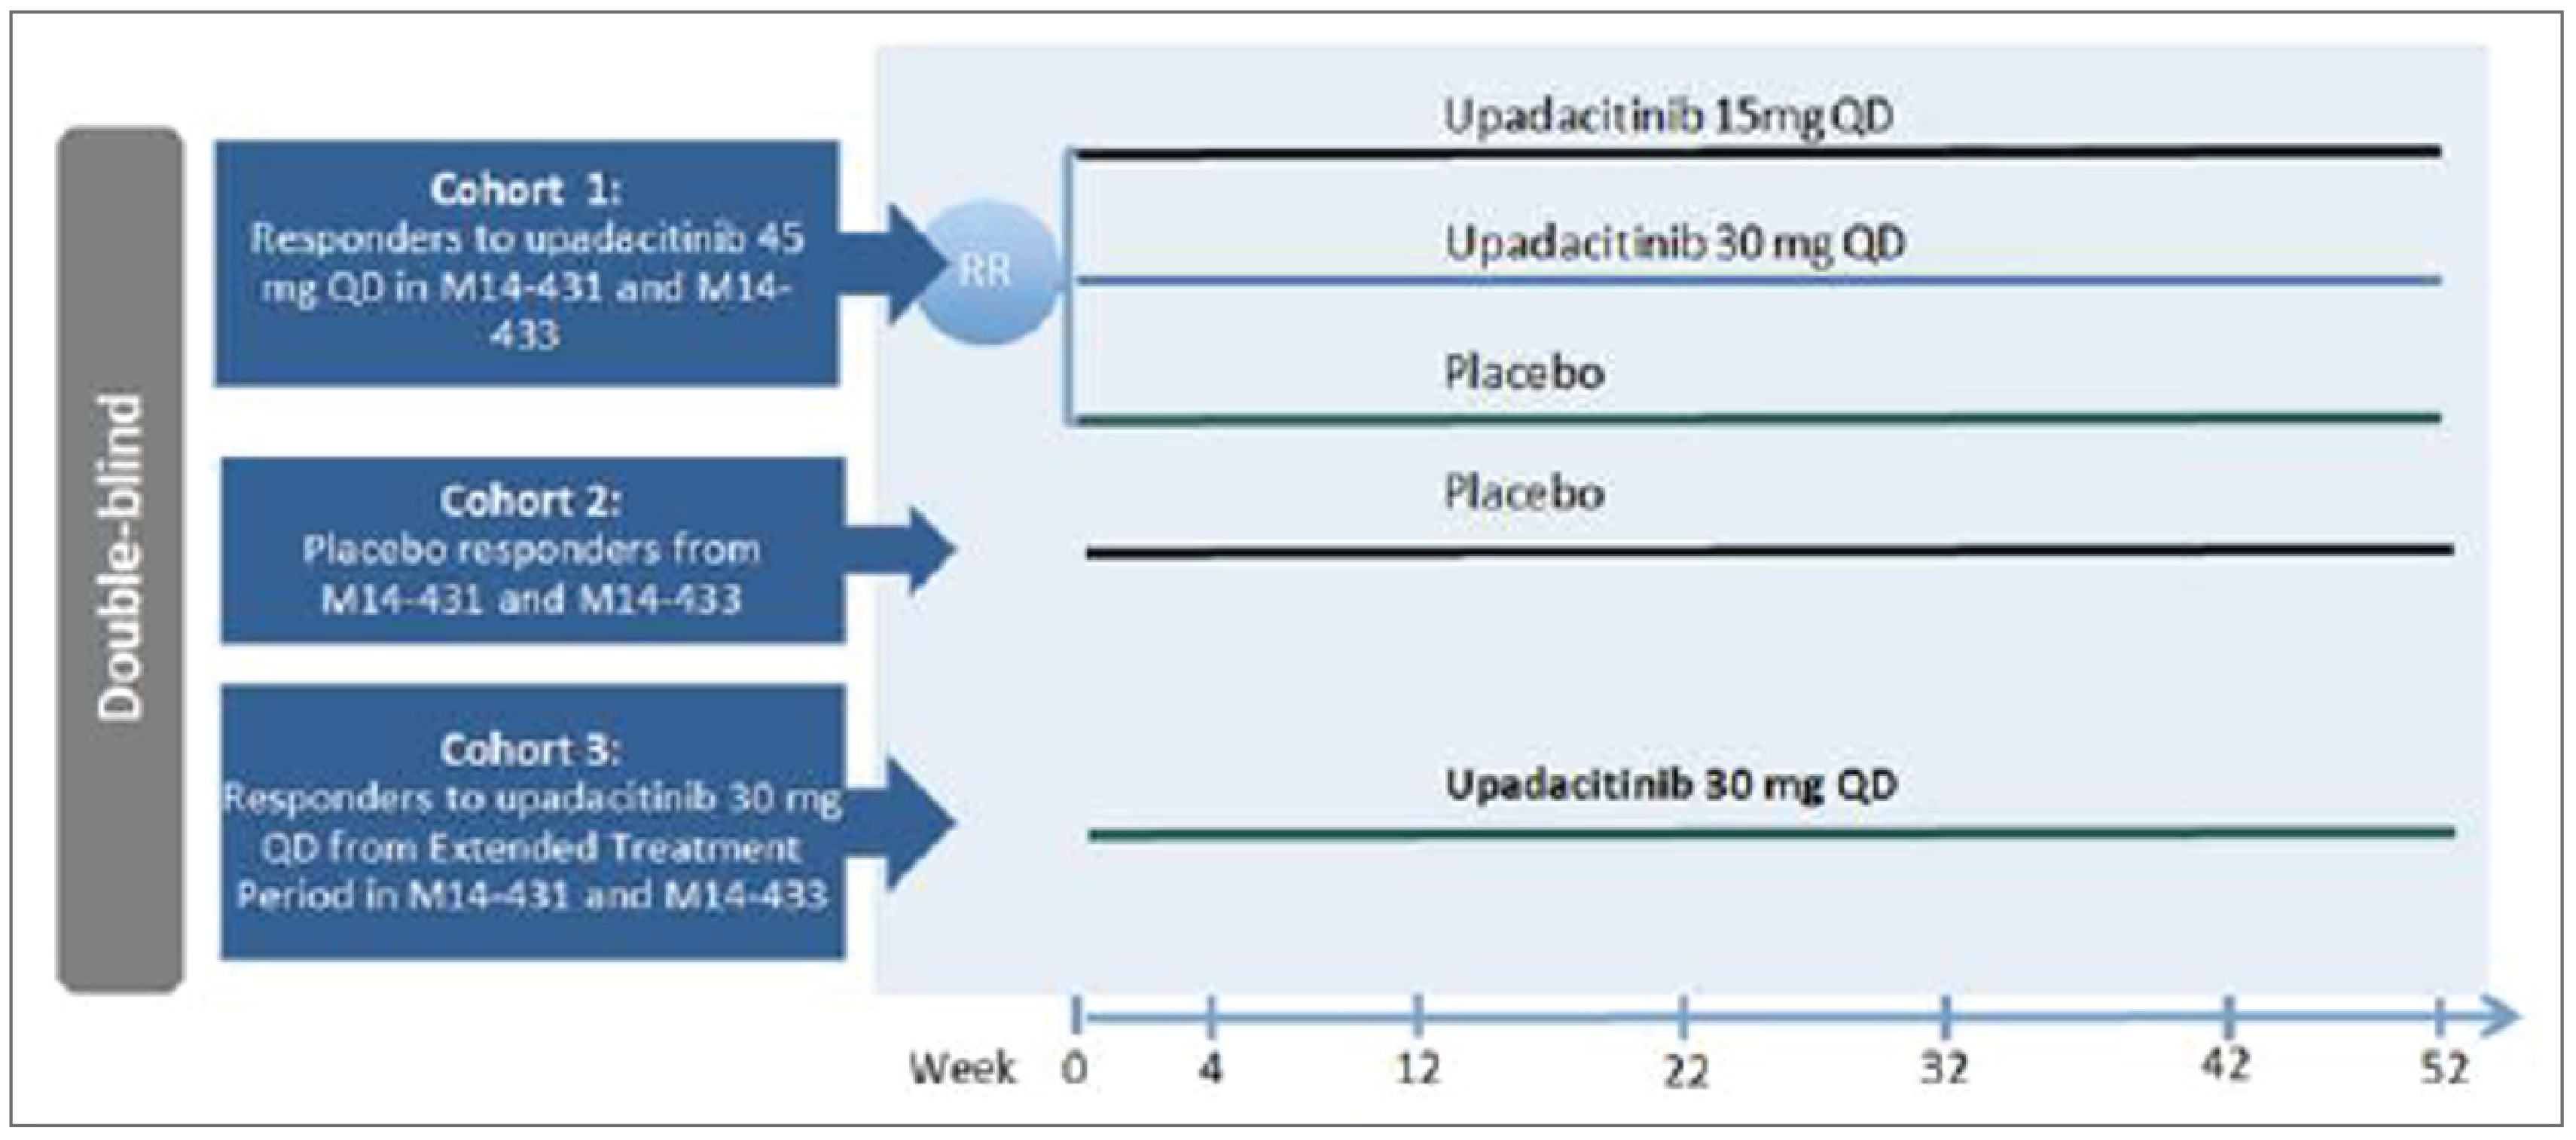 A flow diagram depicting the design of the 52-week U-ENDURE study. Cohort 1 included patients who were responders to upadacitinib 45 mg once daily in either of the 2 induction studies M14 to 431 (U-EXCEED) and M14 to 433 (U-EXCEL); these patients were re-randomized to upadacitinib 15 mg or 30 mg once daily or placebo in a 1:1:1 ratio. Cohort 2 included patients who had received placebo in either of the induction studies and had responded; these patients continued to receive placebo. Cohort 3 included patients who had not achieved clinical response after the 12-week induction period with upadacitinib 45 mg, but thereafter received 12-week extended induction treatment with upadacitinib 30 mg and achieved a clinical response in either induction study; these patients continued to receive upadacitinib 30 mg in the U-ENDURE trial.